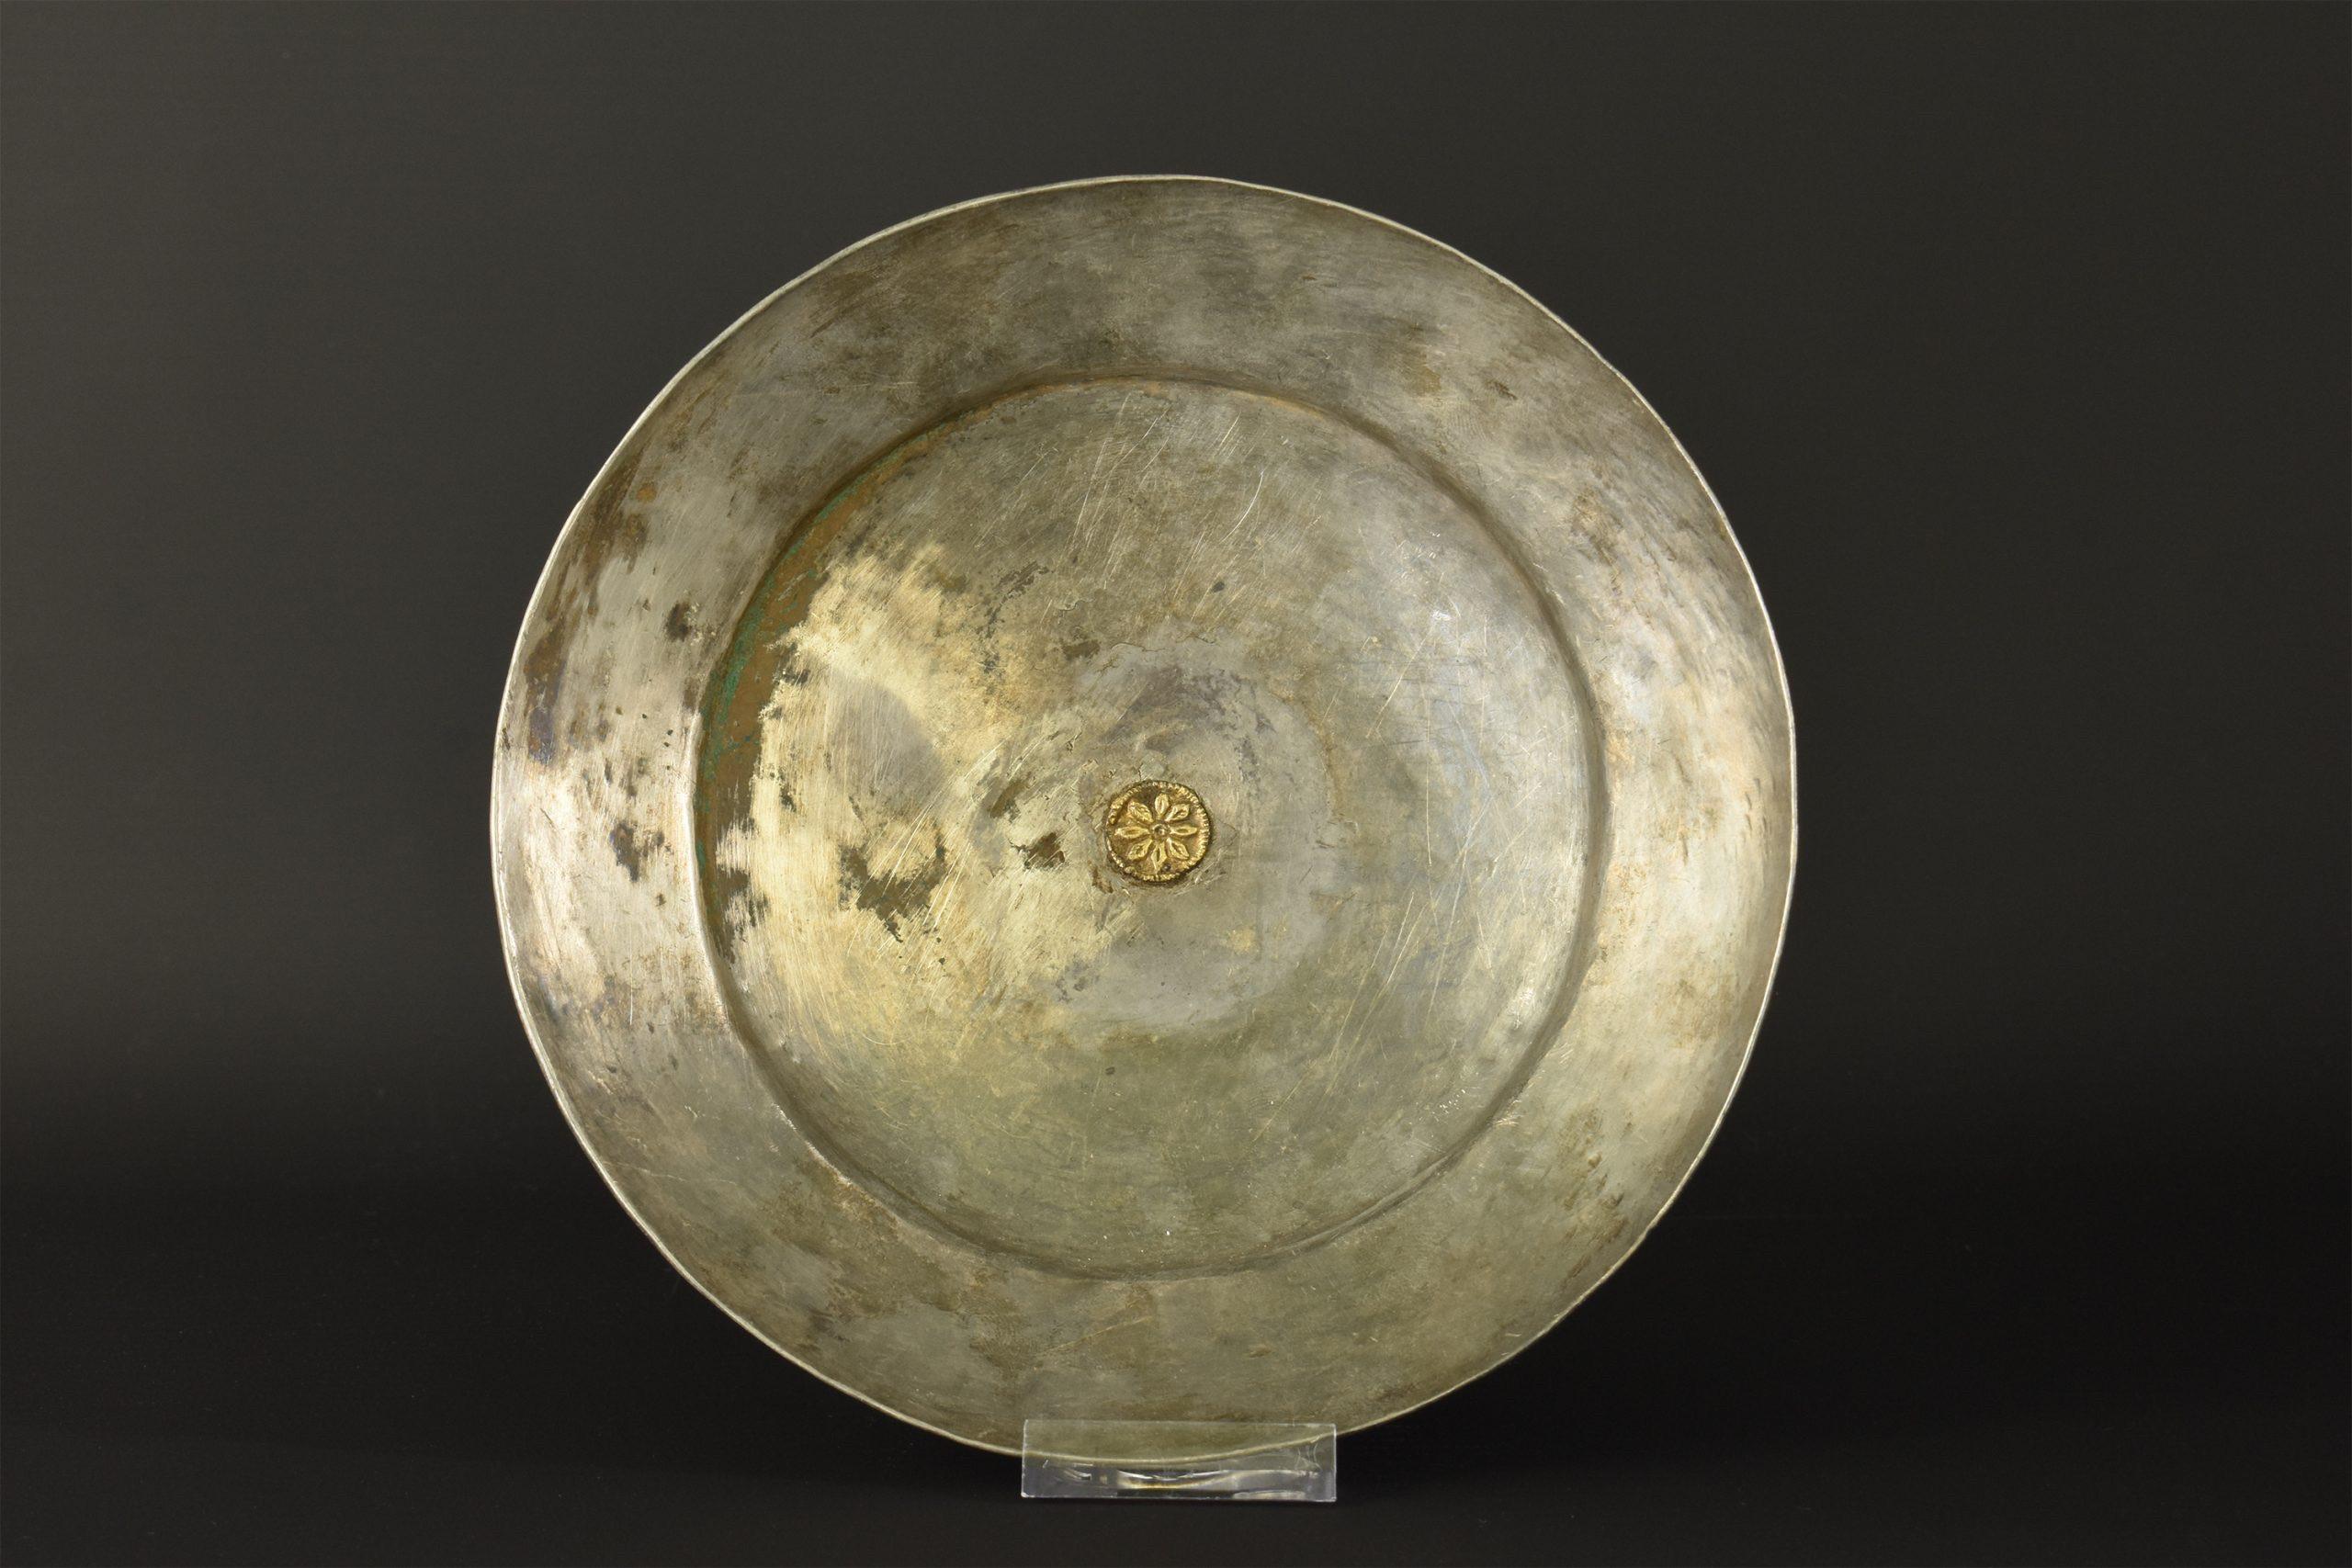 A fantastic phiale formed by a single hammered silver sheet; a smooth surface with a slightly flanged, corseted neck, a flared, unpronounced rim and a shallow interior, circa 400-300 BC. The central part is decorated with an applied gilded rosette.